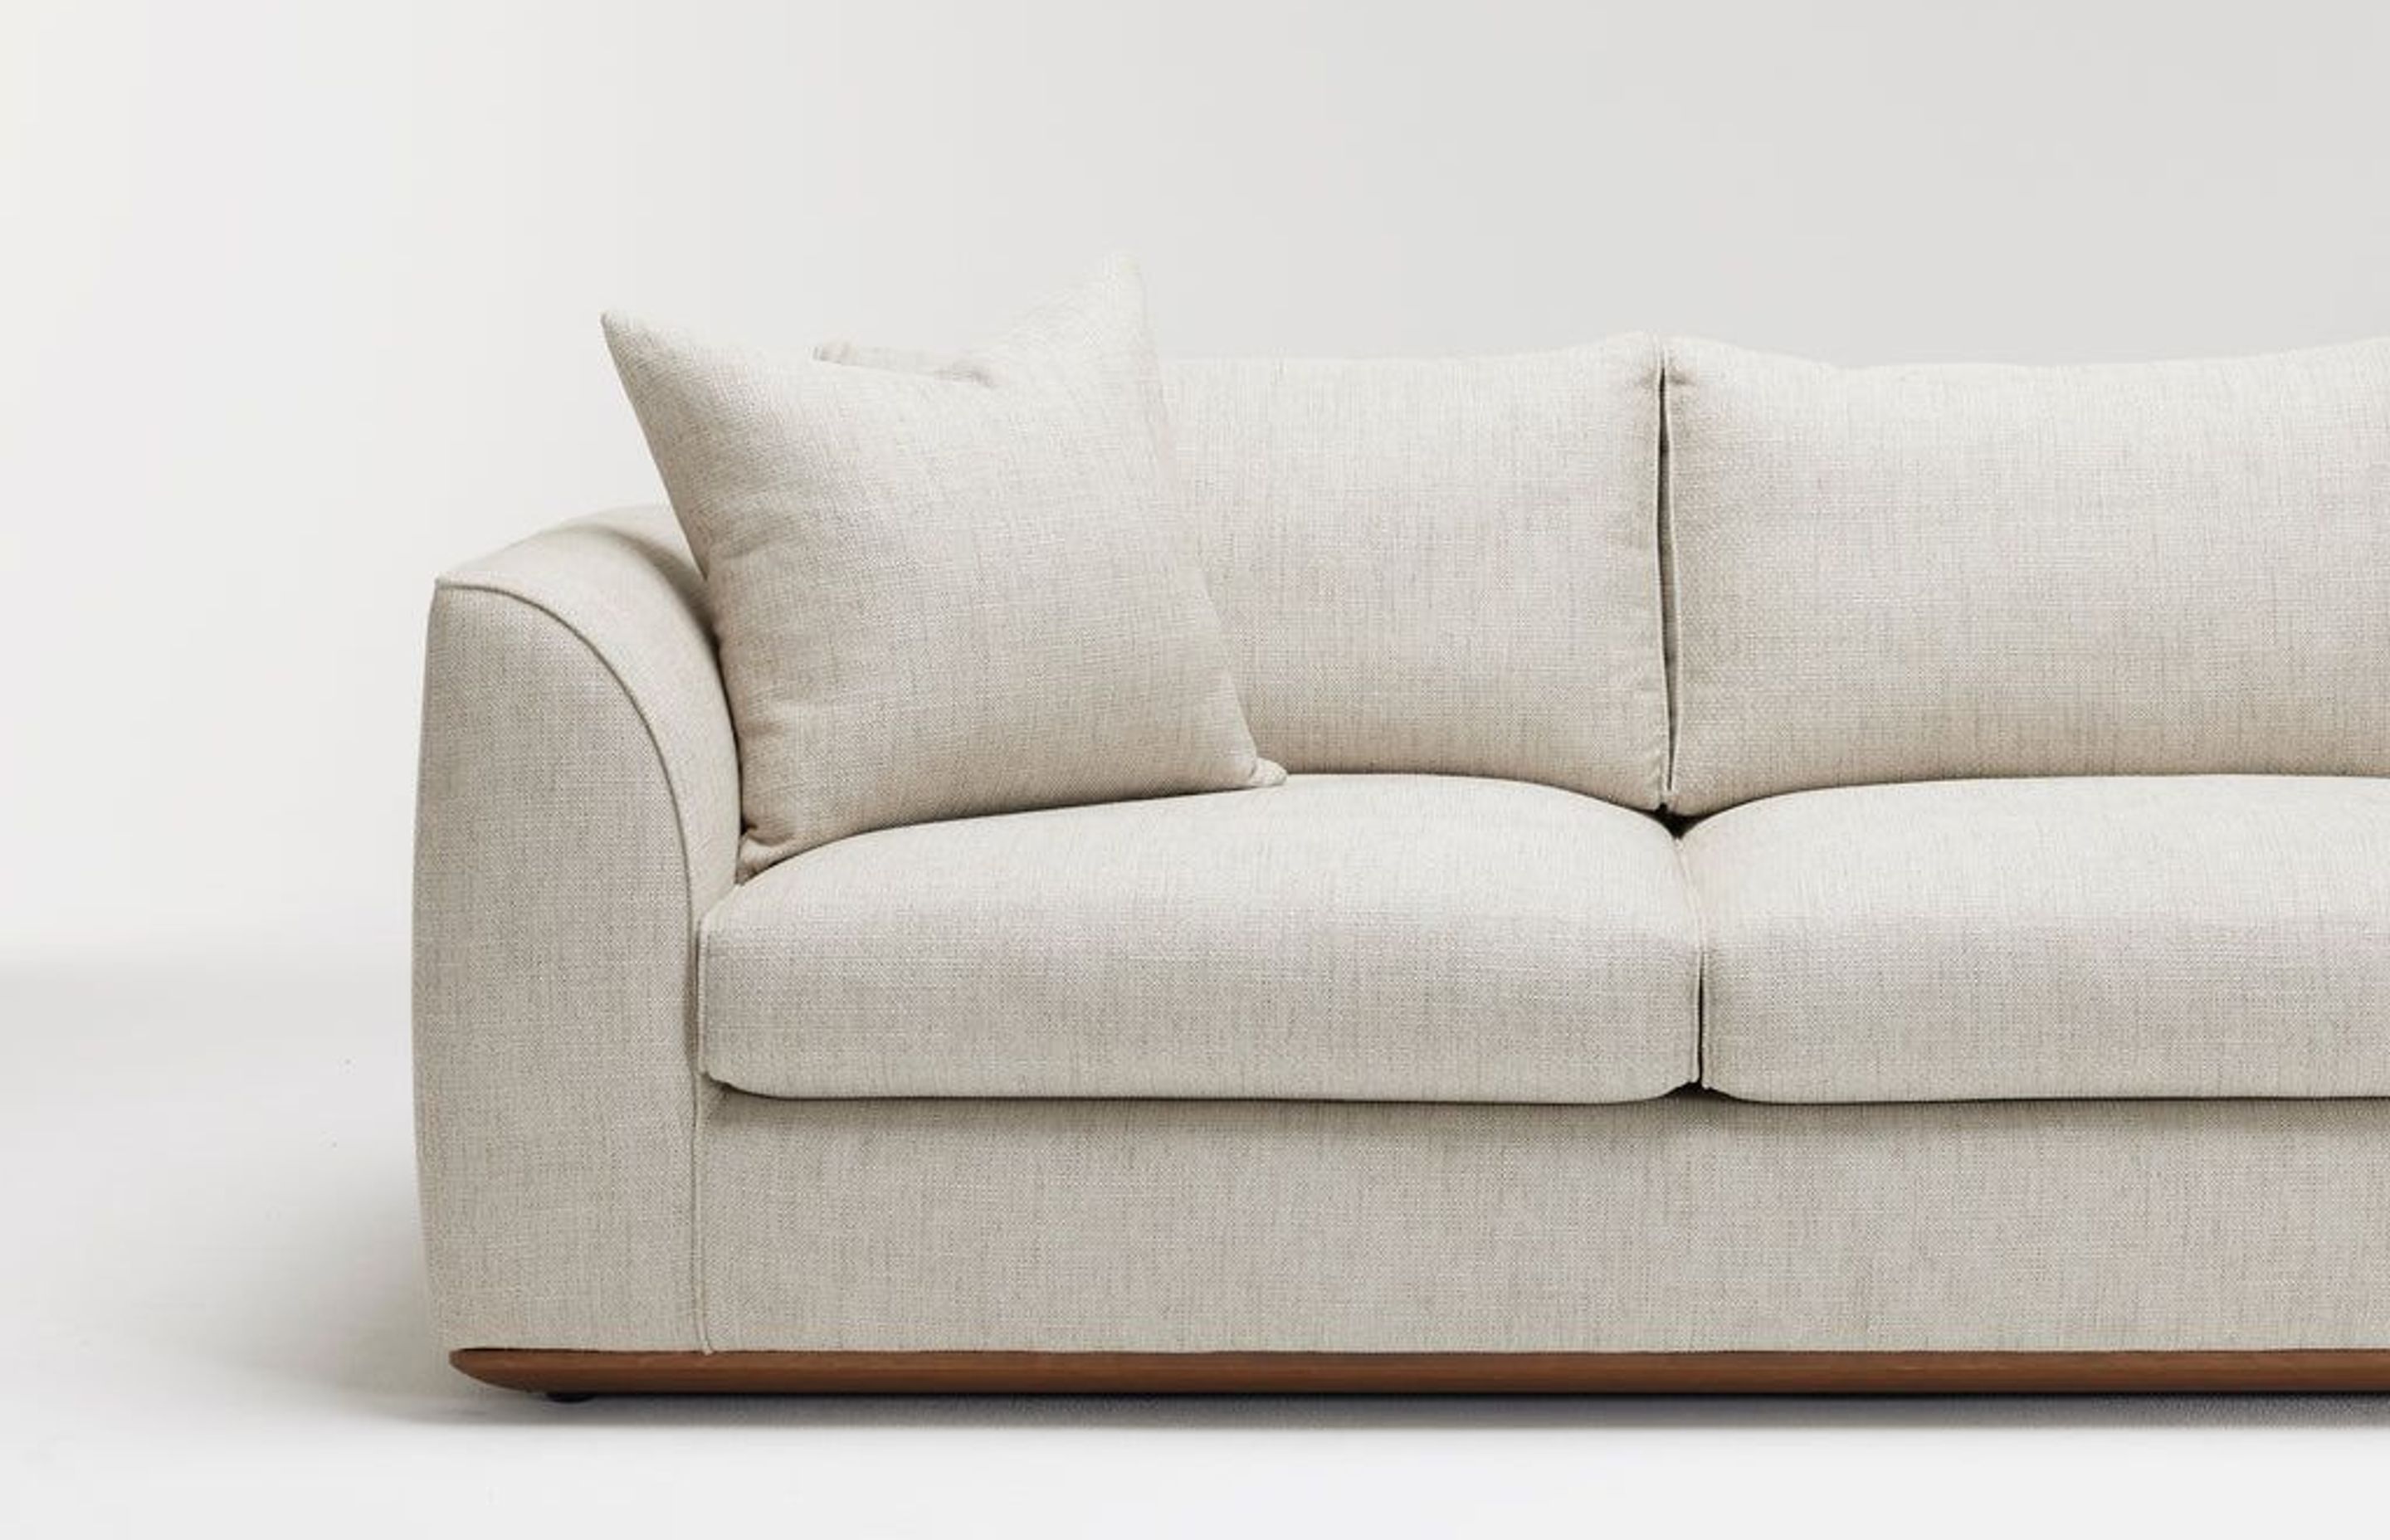 The Erskine Sofa by Kett. Pictured here in category E fabric, Como Barley.